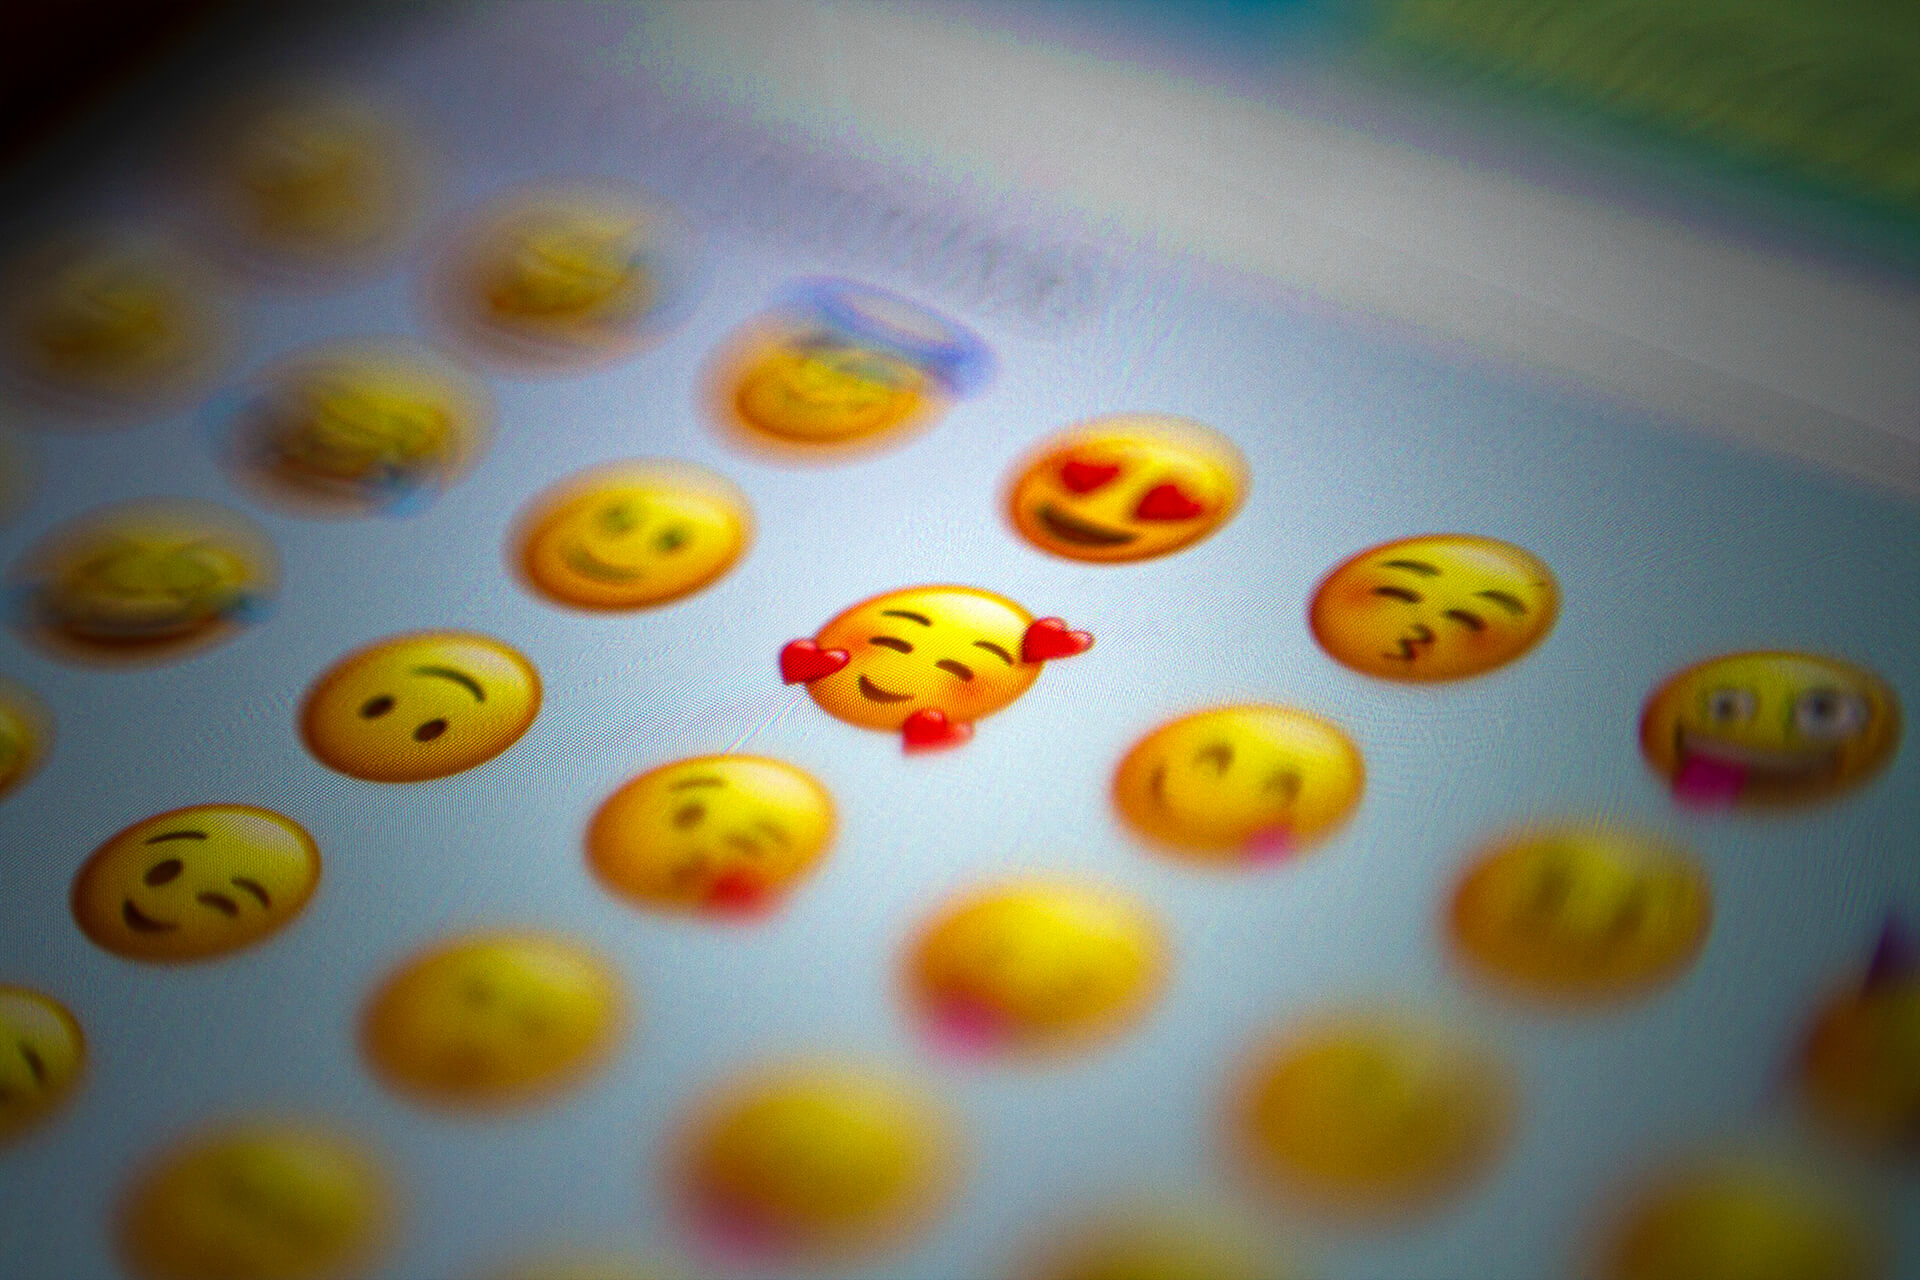 What is sentiment analysis and how can it be used in business? Our case study